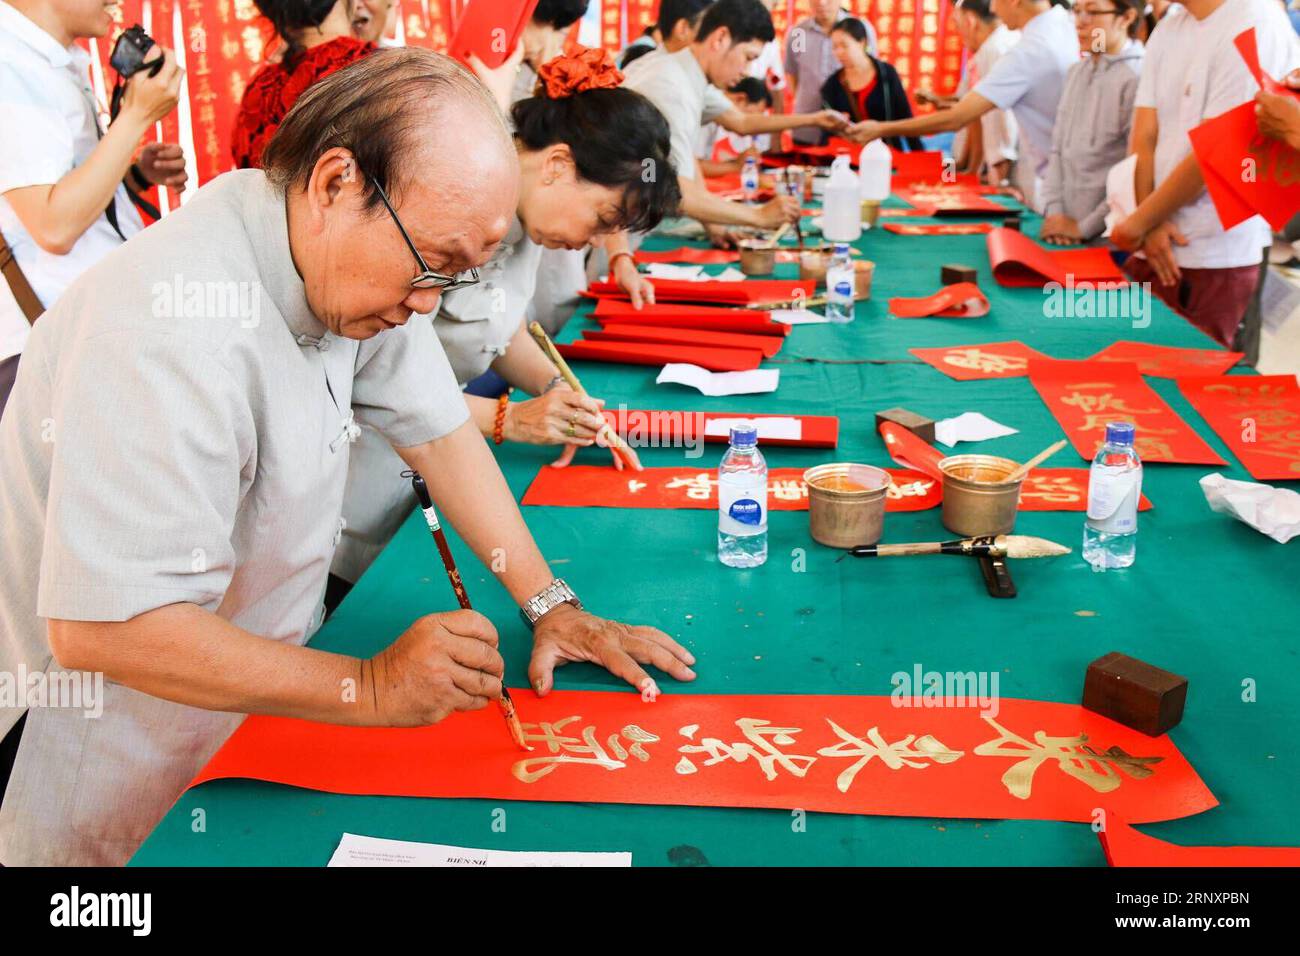 (180208) -- HO CHI MINH CITY, Feb. 8, 2018 -- Calligraphers write new year couplets at a charity event to celebrate the Lunar New Year in Ho Chi Minh city, Vietnam, Feb. 8, 2018. )(rh) VIETNAM-HO CHI MINH CITY-CHINESE LUNAR NEW YEAR-CALLIGRAPHY EVENT HoangxThixHuong PUBLICATIONxNOTxINxCHN Stock Photo